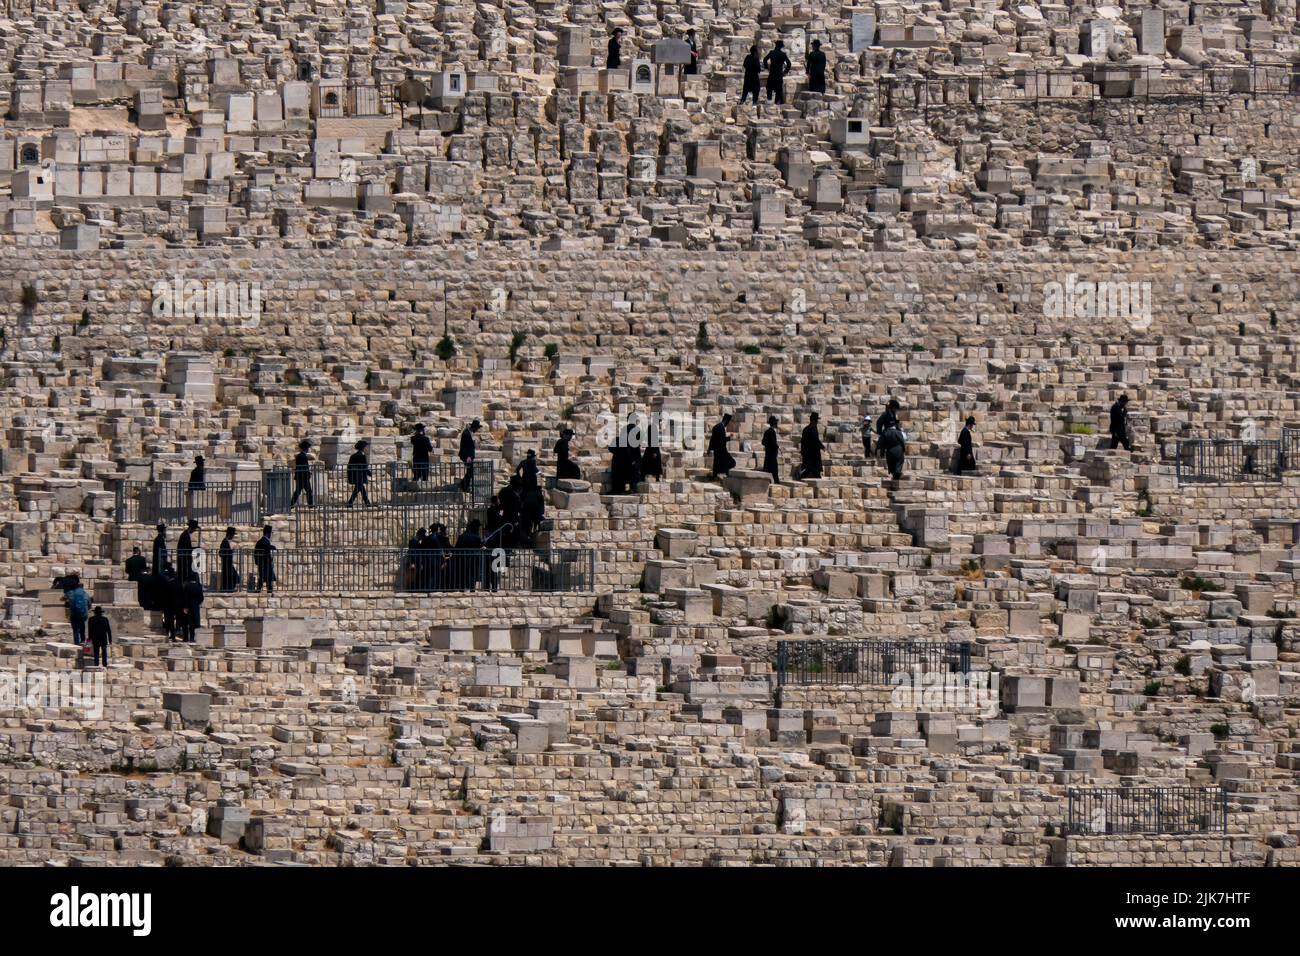 Haredi Jews visiting the Jewish cemetery on the slopes of Mount of Olives in East Jerusalem Israel Stock Photo